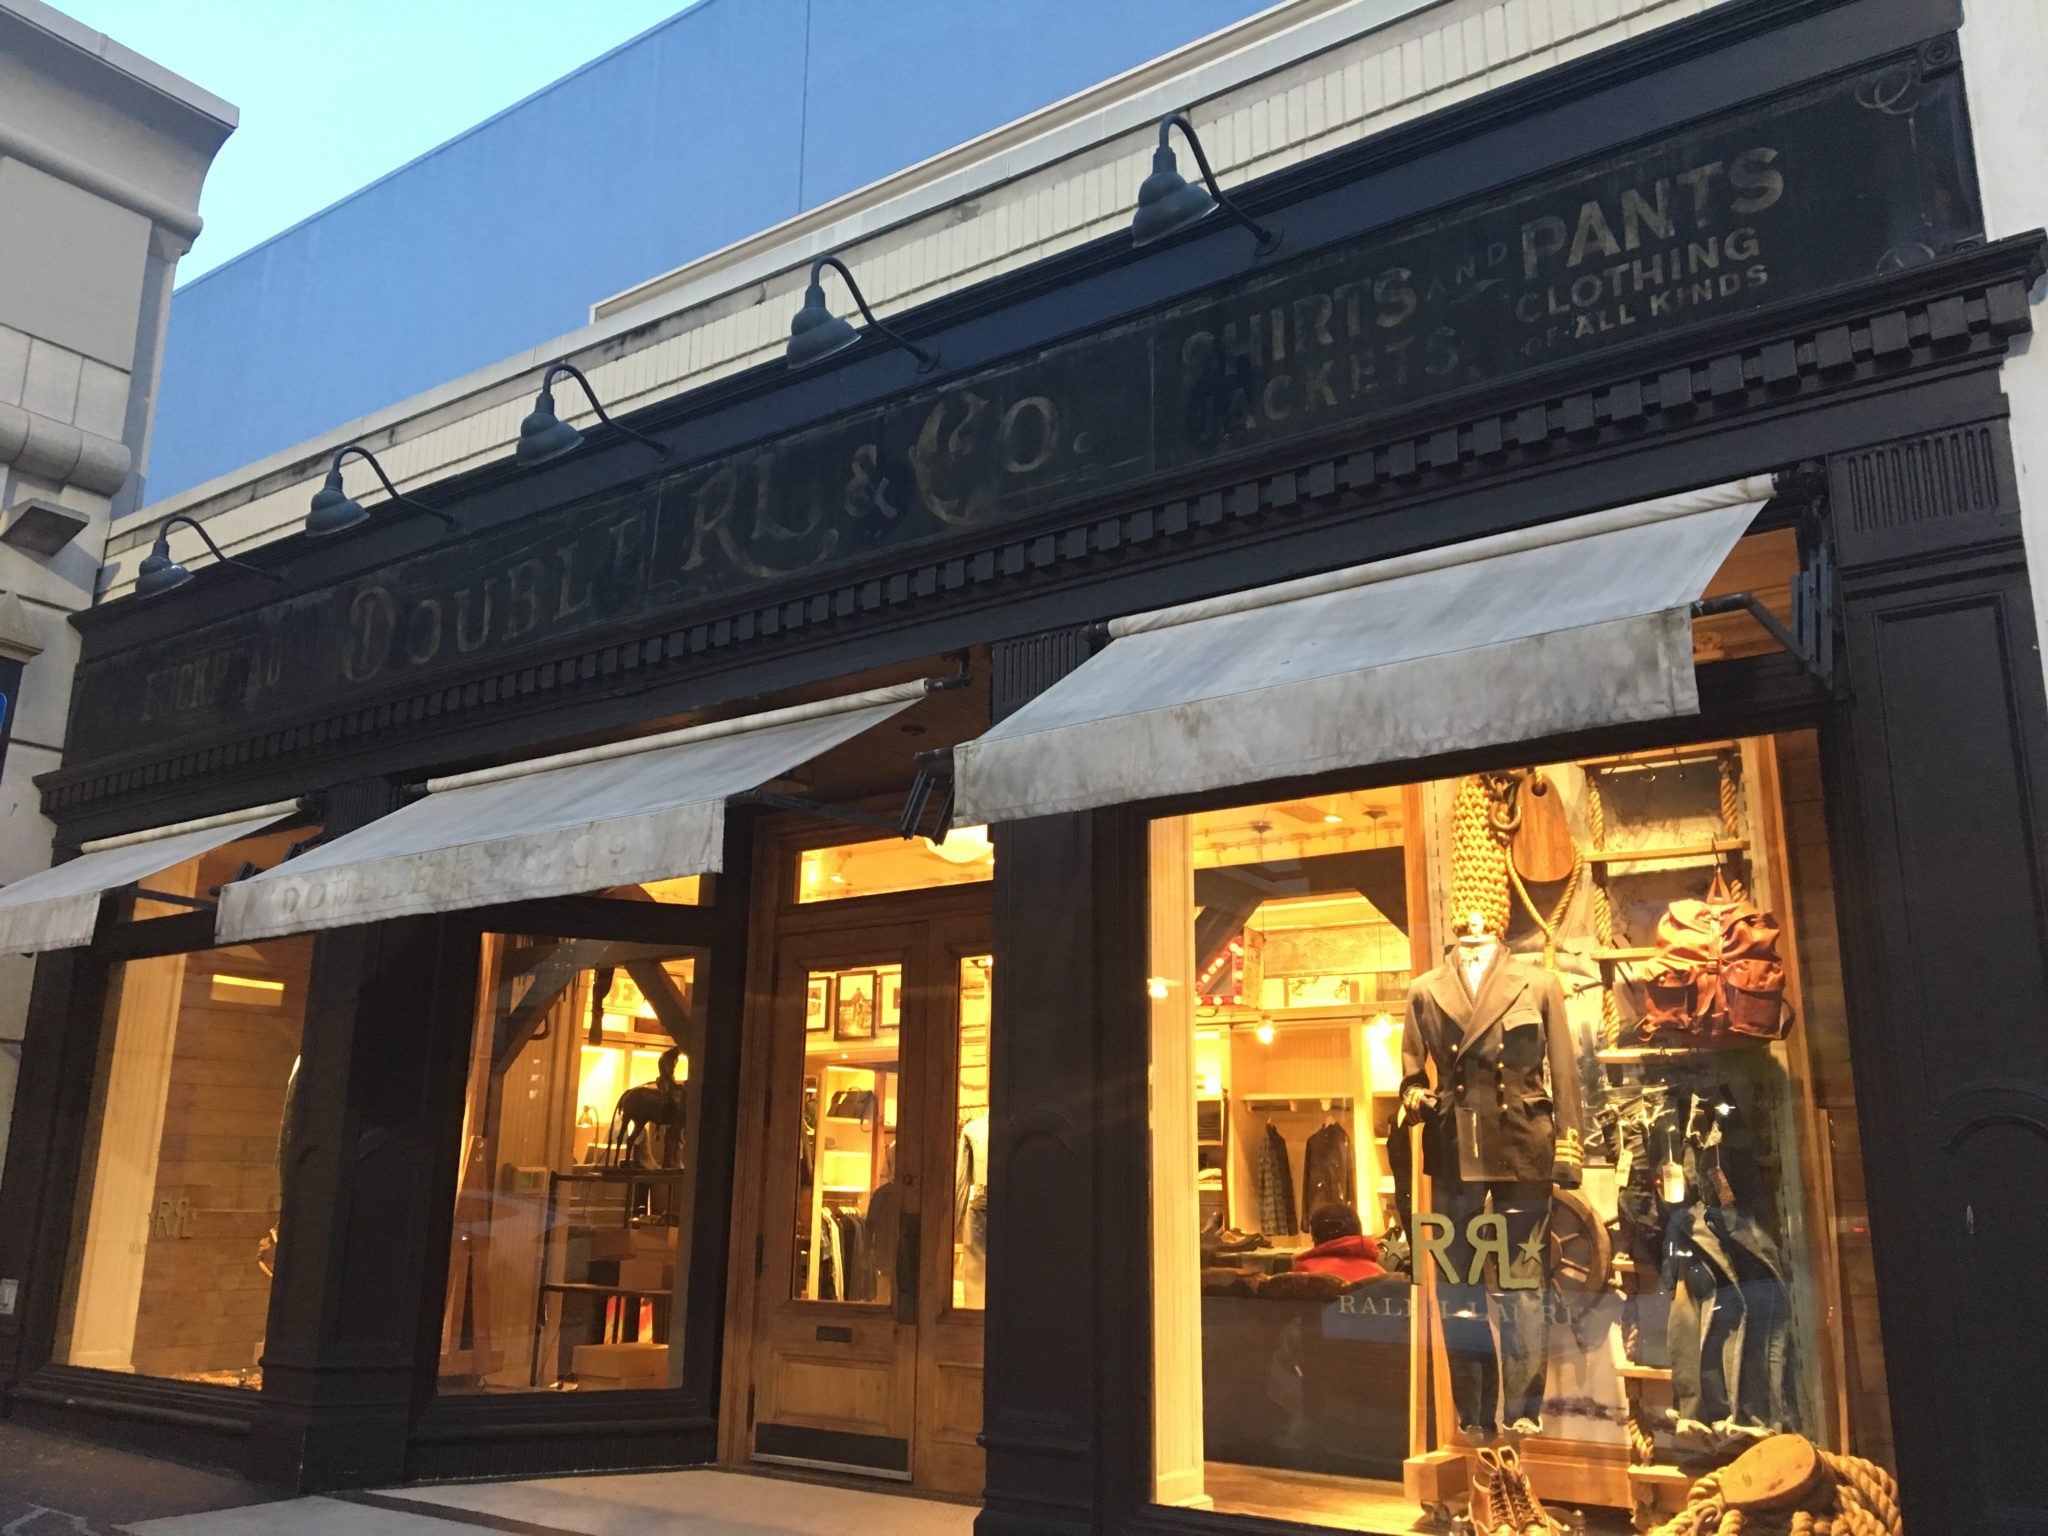 Ralph Lauren To Shutter Its Two-Story Lenox Square Mall Store January 27 -  What Now Atlanta: The Best Source for Atlanta News